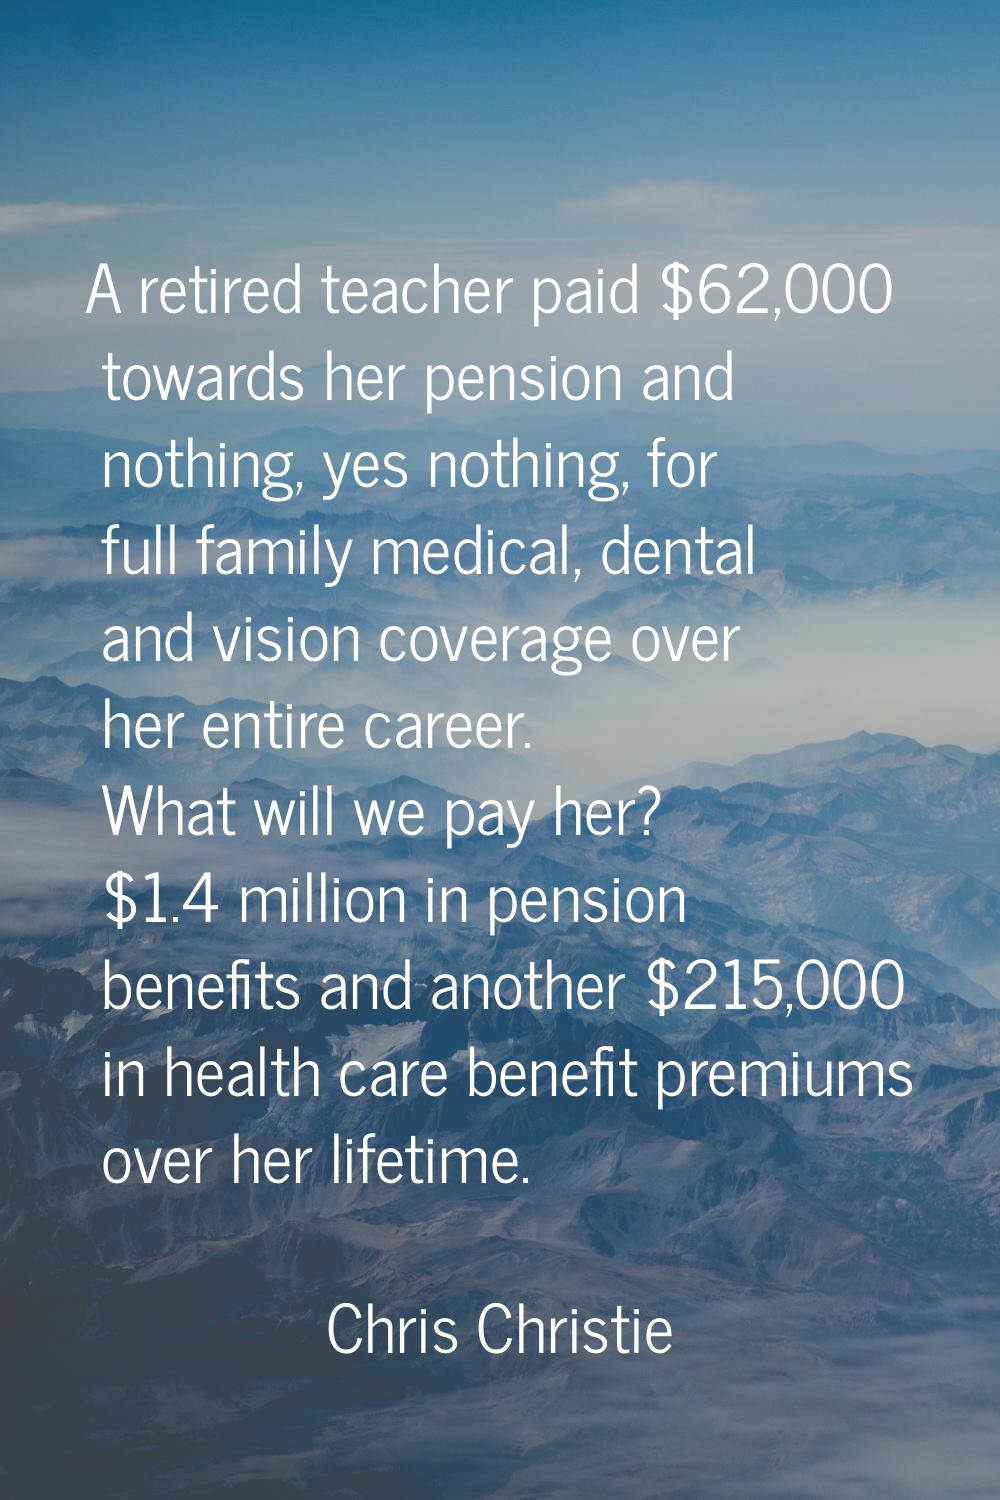 A retired teacher paid $62,000 towards her pension and nothing, yes nothing, for full family medica